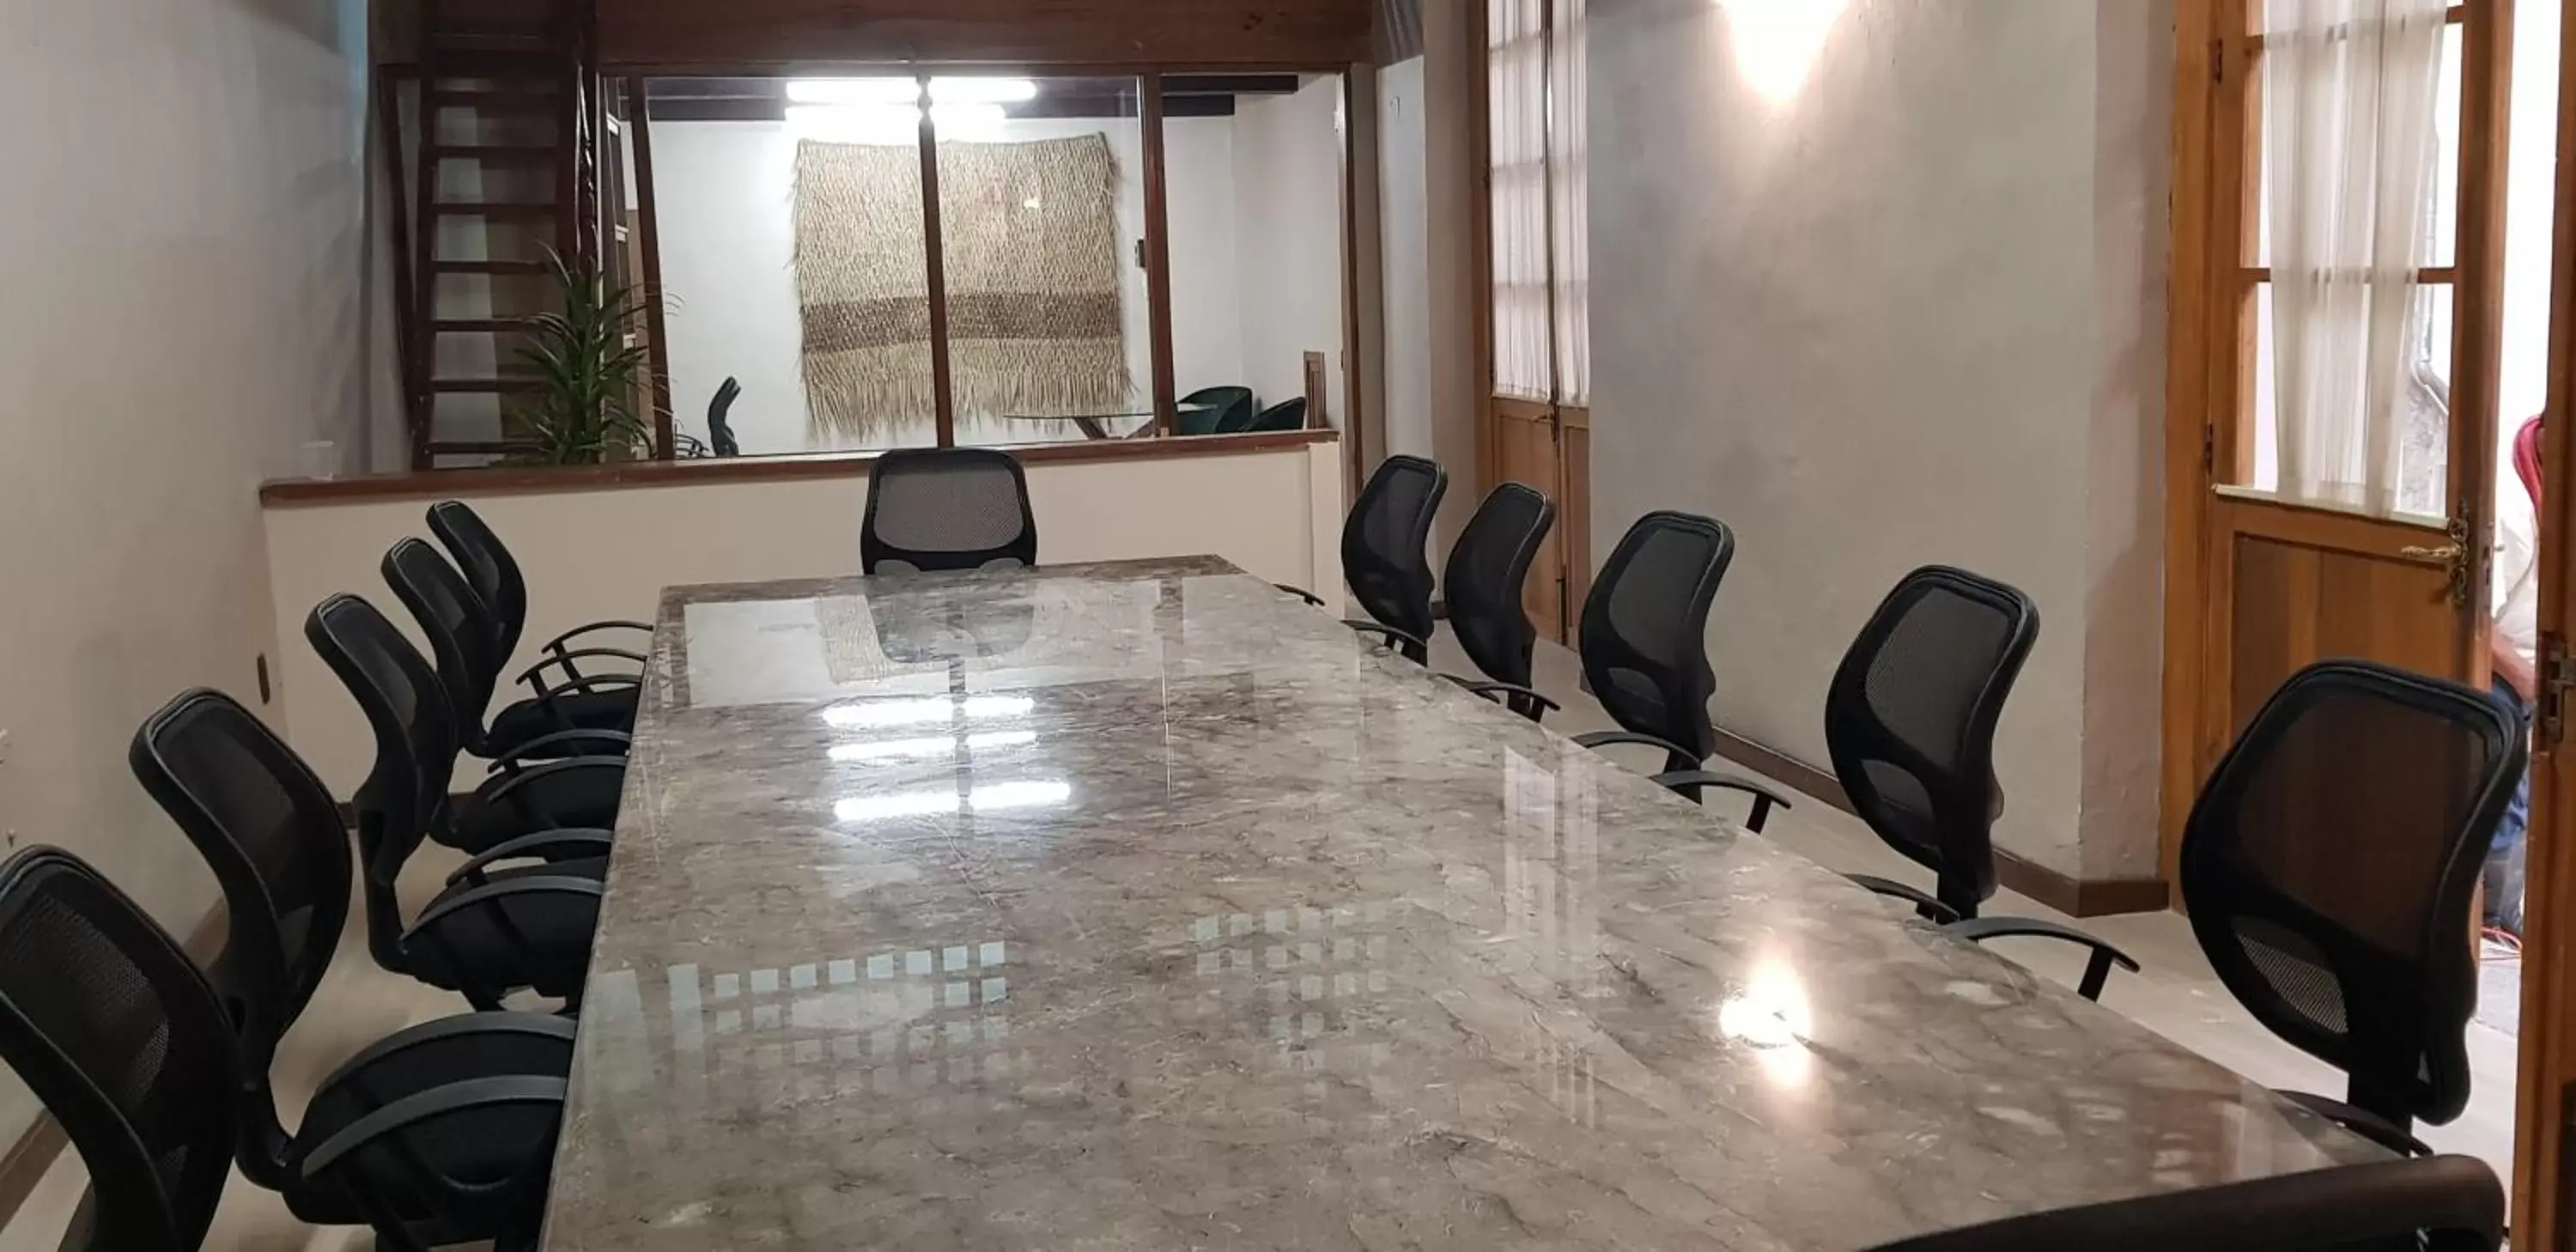 Meeting/conference room in Hotel San Francisco Tlaxcala